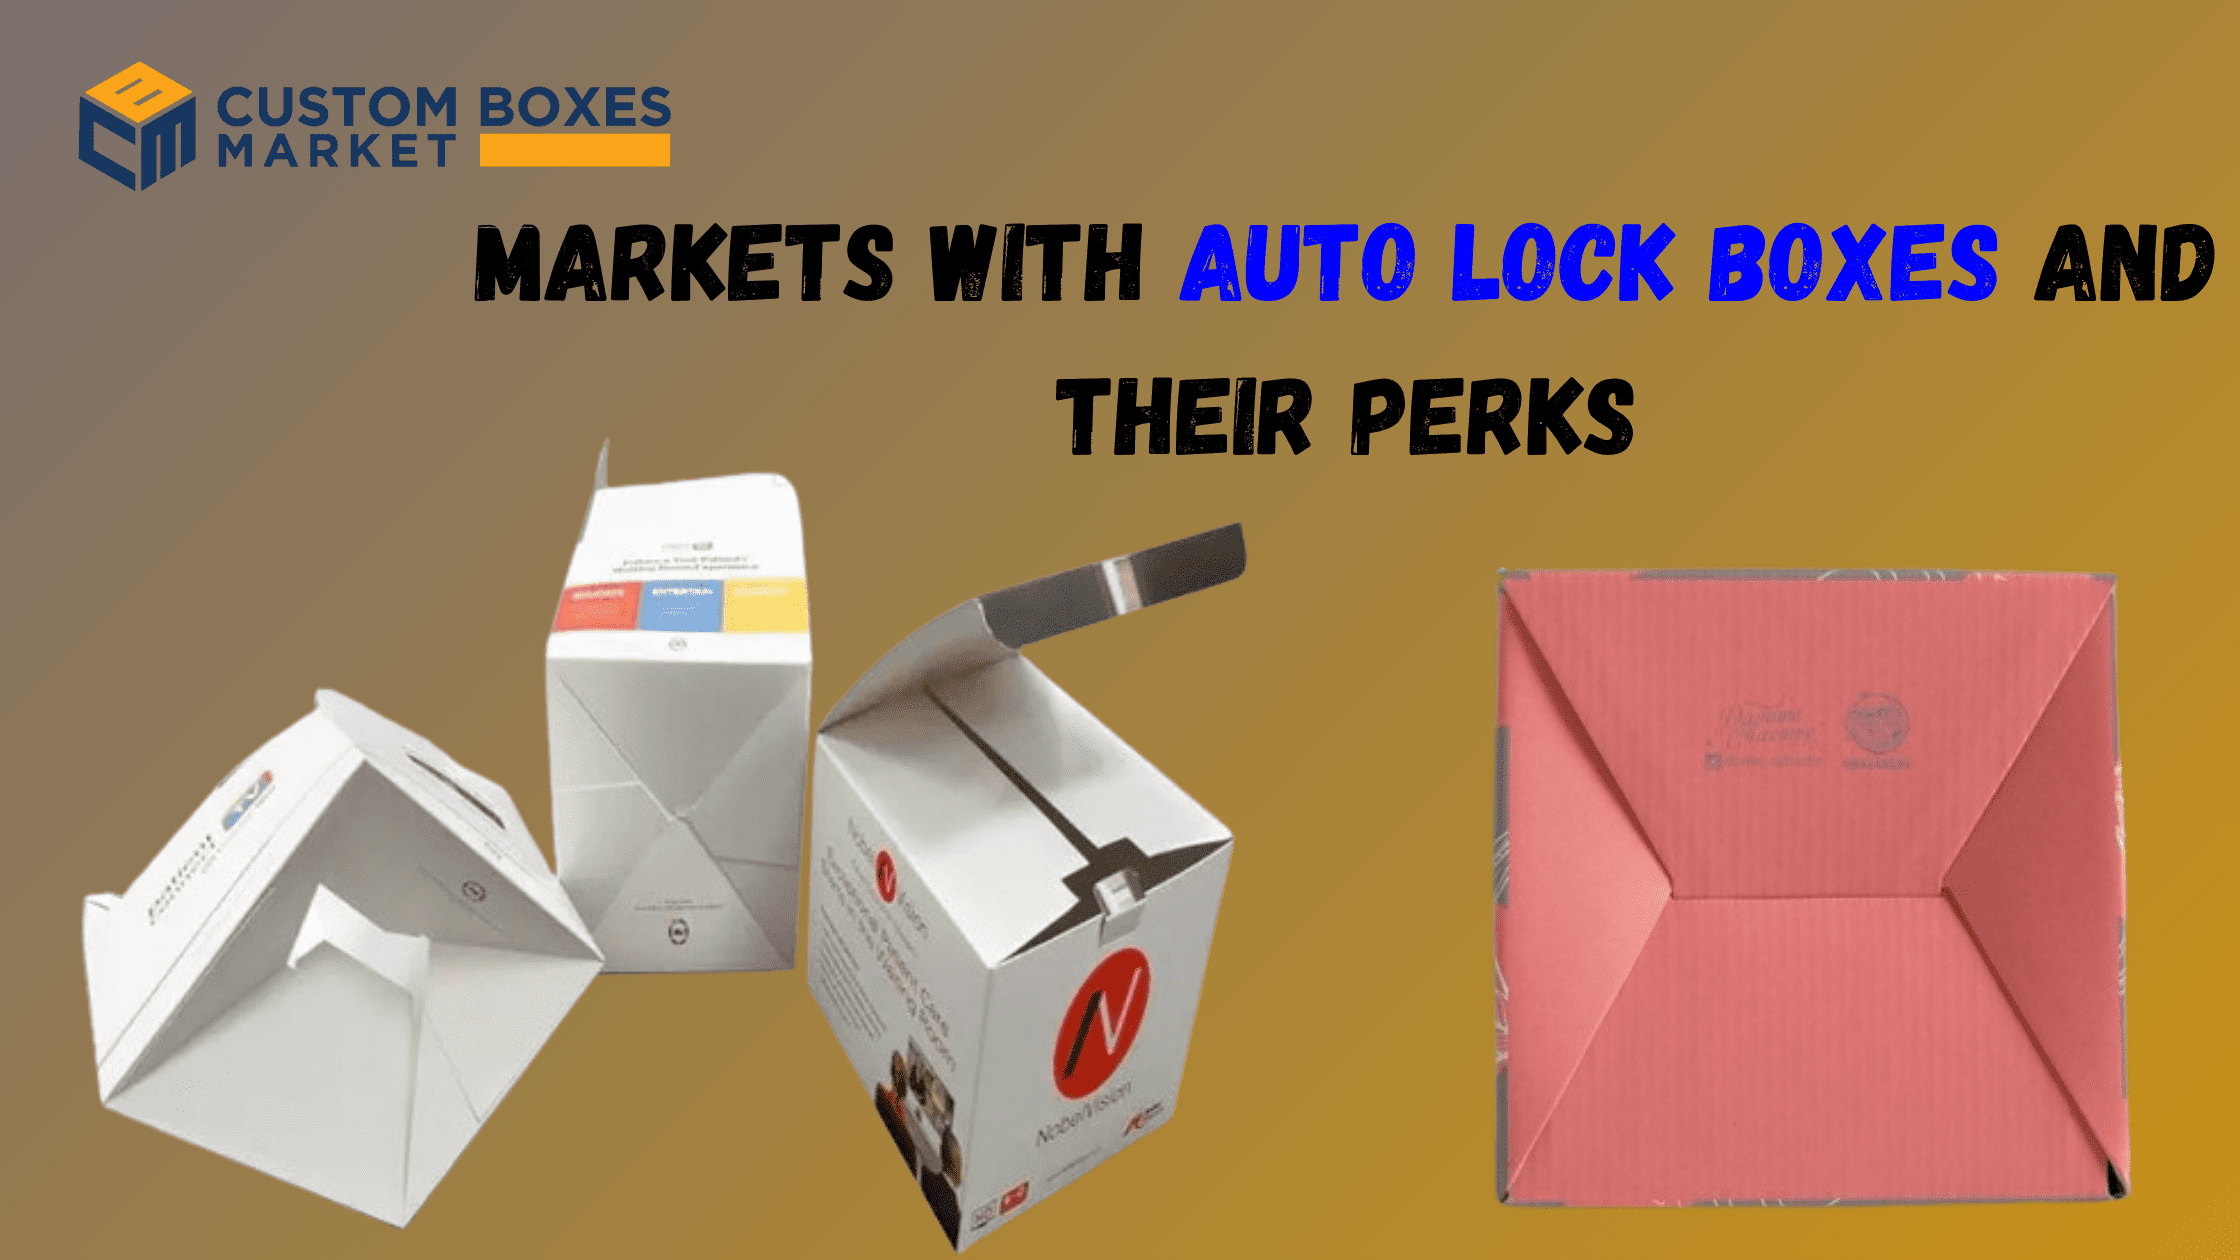 Revolutionizing Markets with Auto Lock Boxes and Their Perks